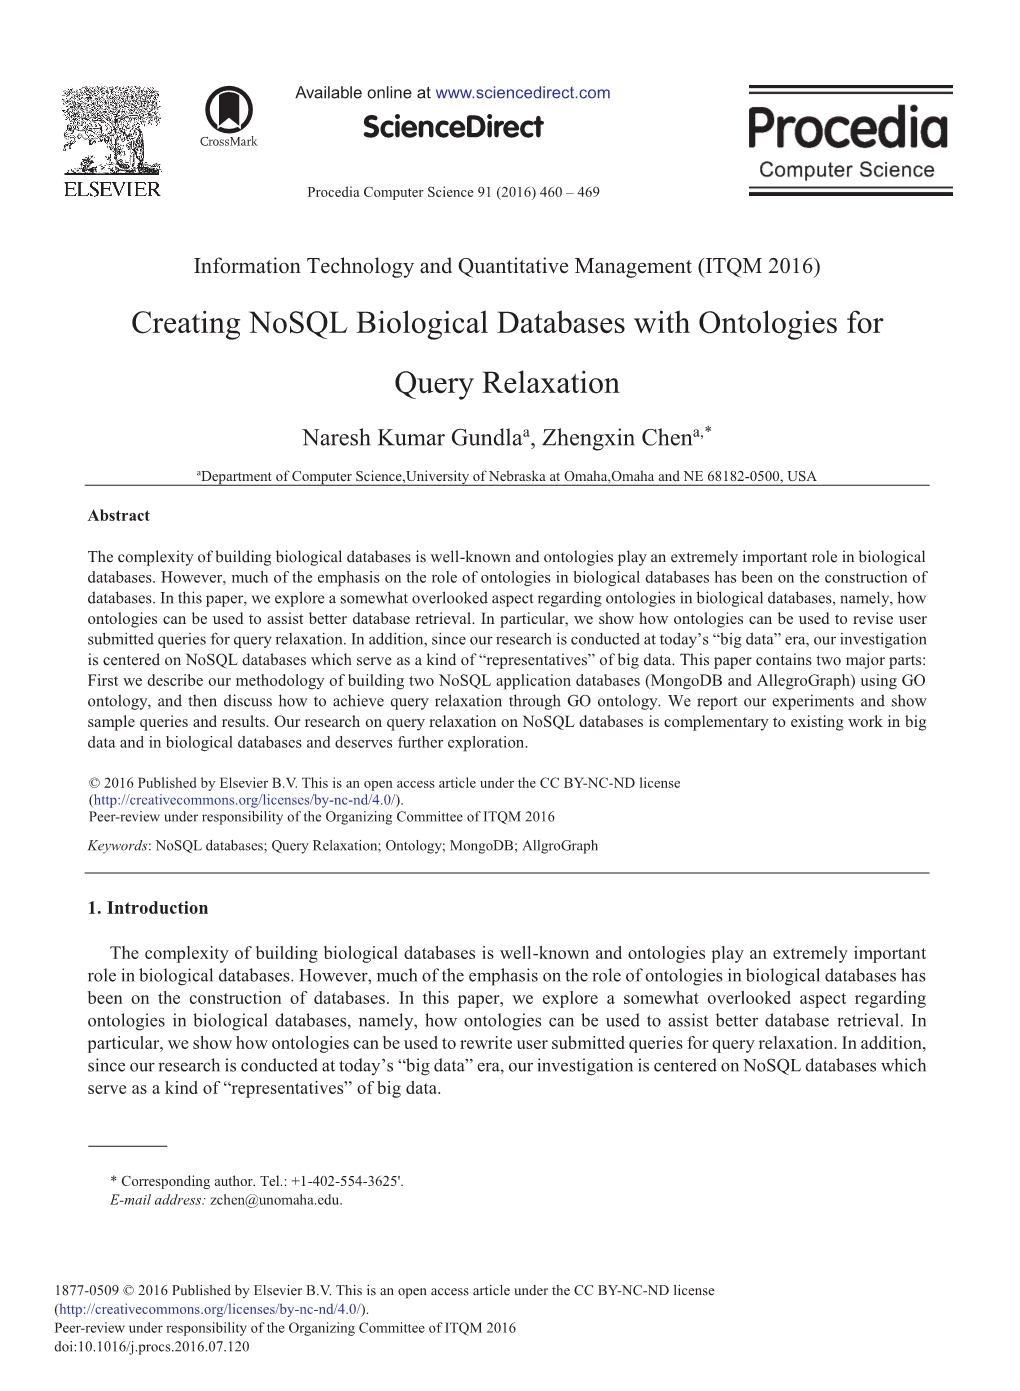 Creating Nosql Biological Databases with Ontologies for Query Relaxation